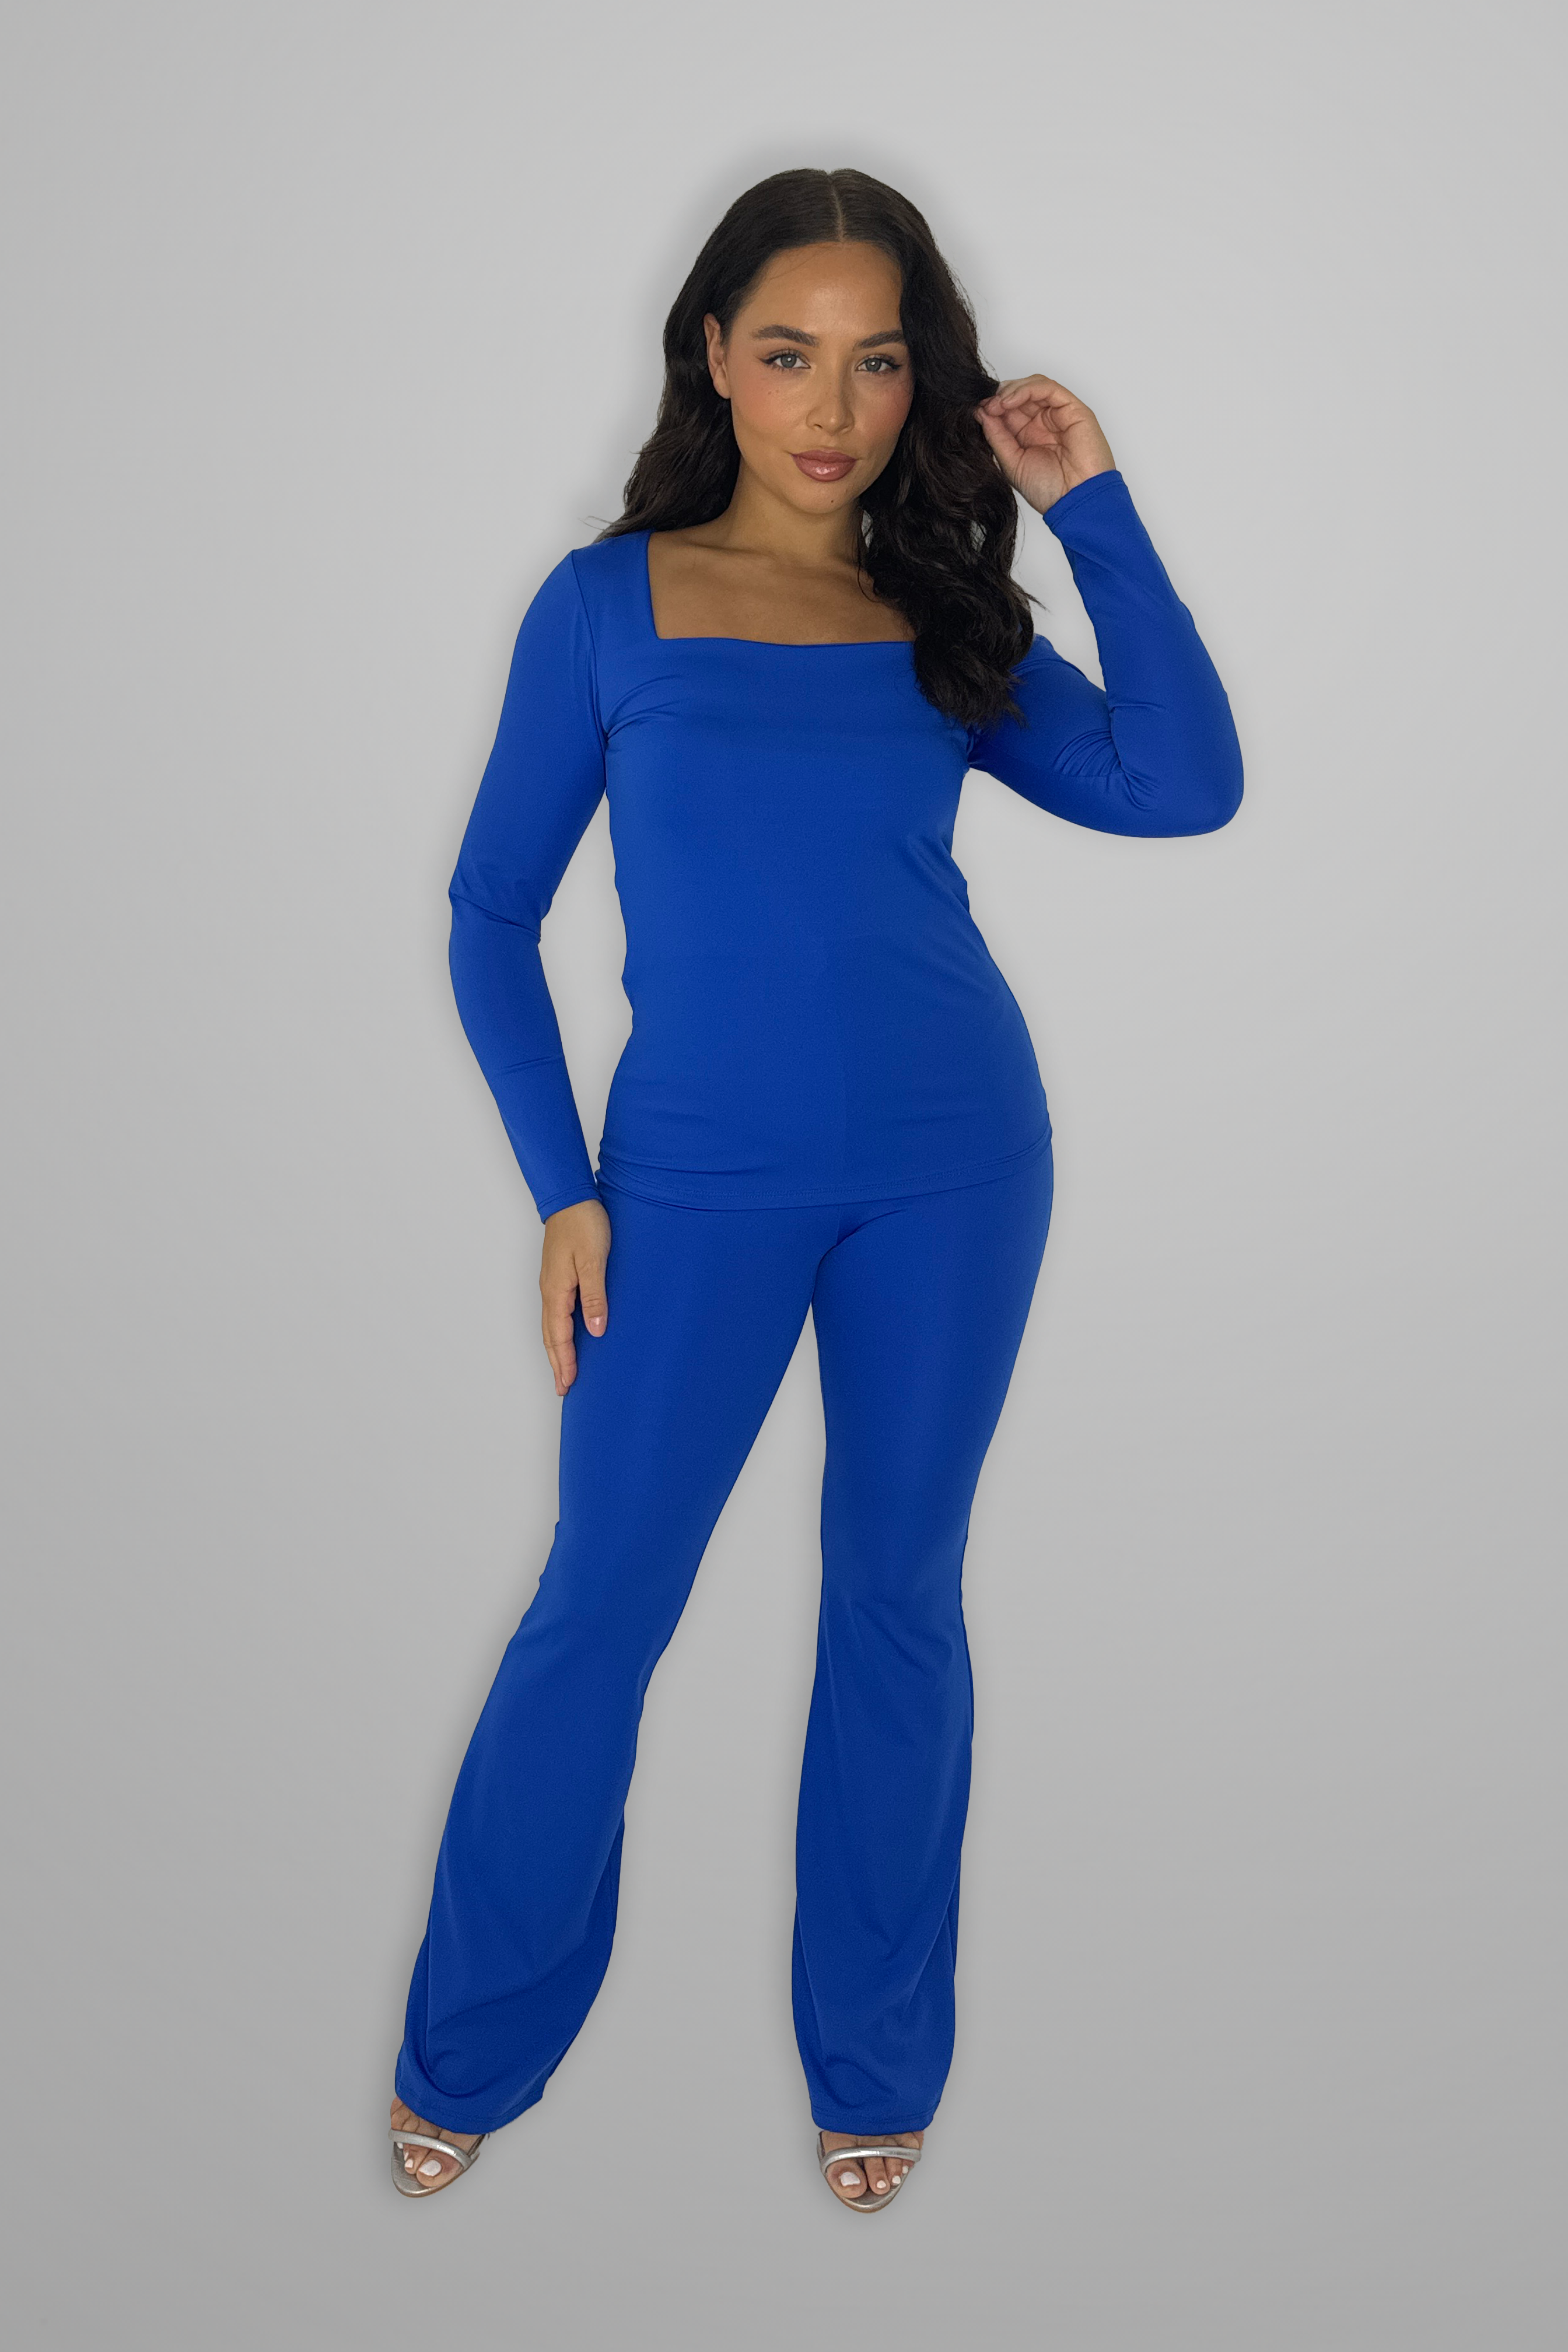 Square Neck Long Sleeve Top And Flare Leg Co-ord Set